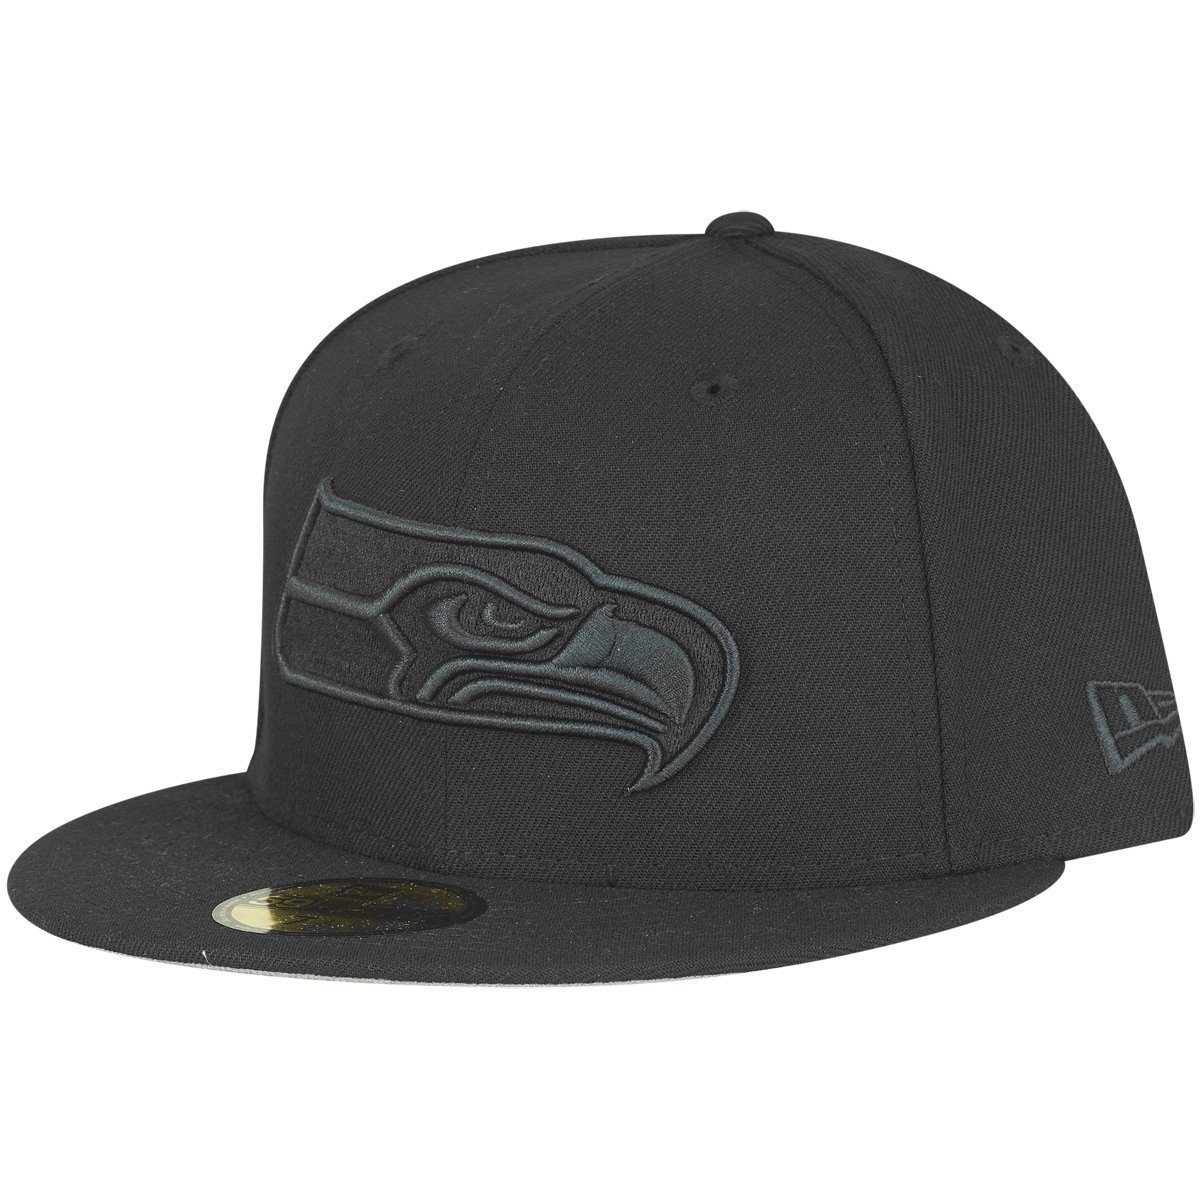 Era New Cap 59Fifty Fitted Seattle Seahawks NFL